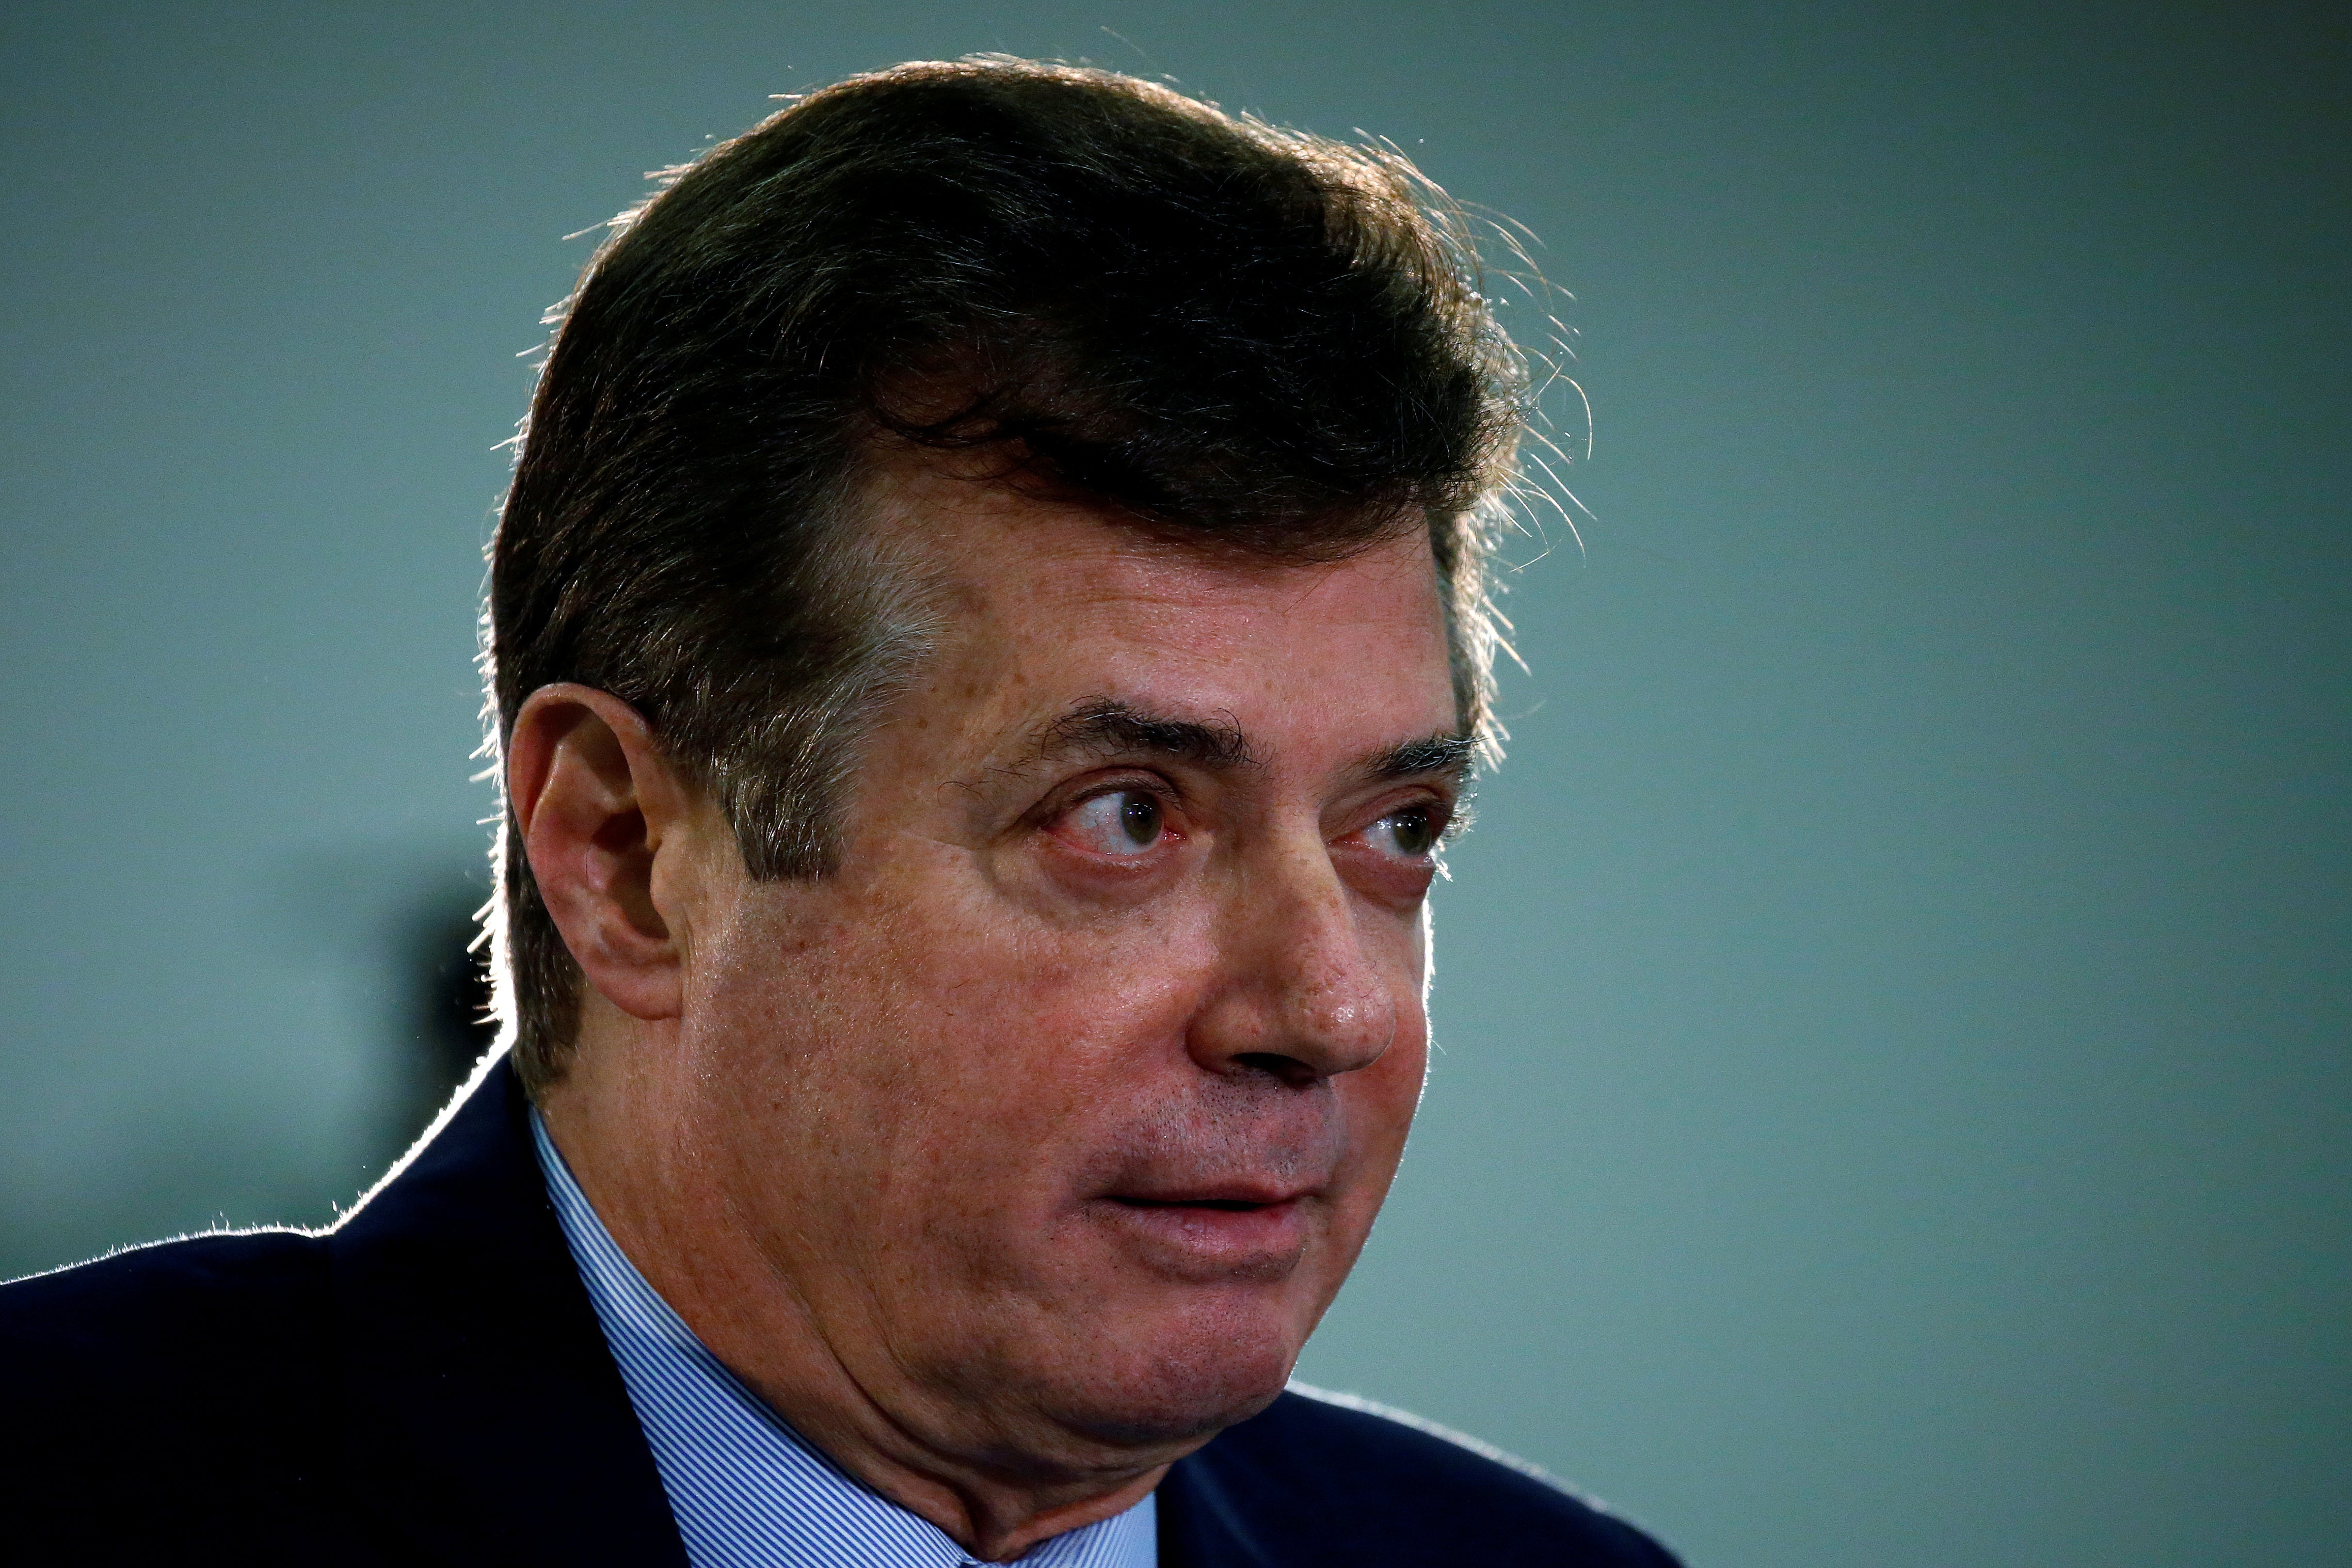 Paul Manafort speaks at a press conference at the Republican Convention in Cleveland, U.S., July 19, 2016. 